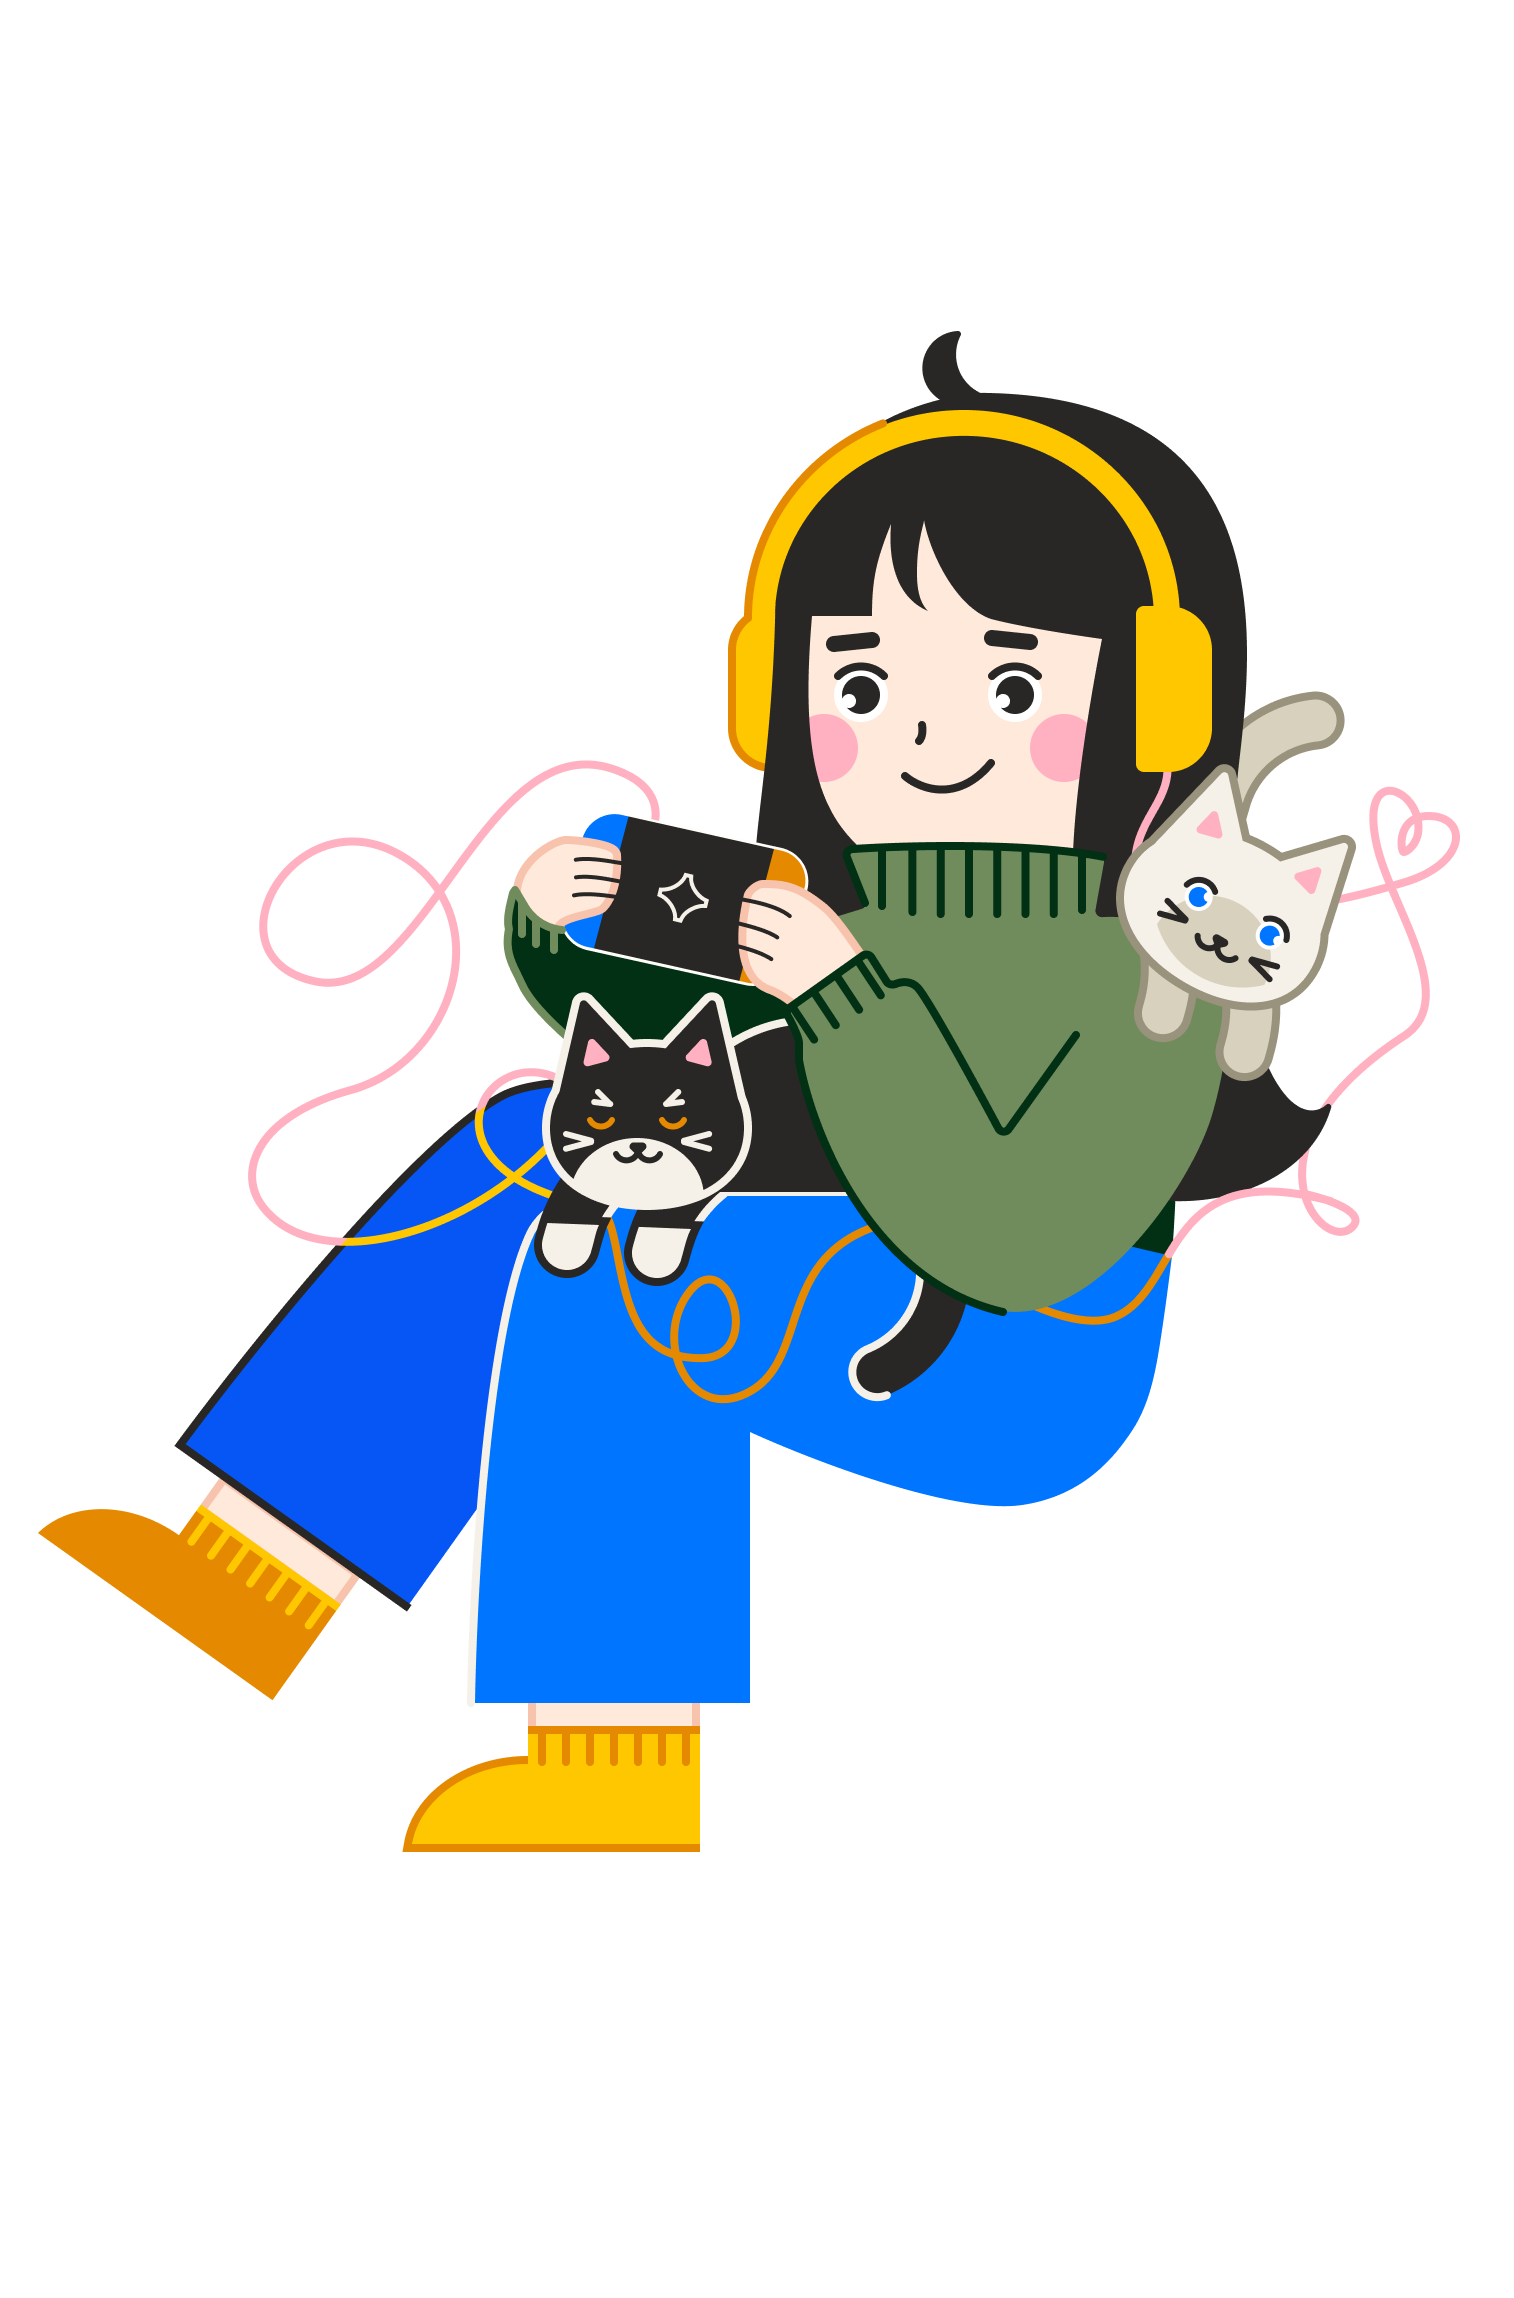 Illustration of girl with 2 cats